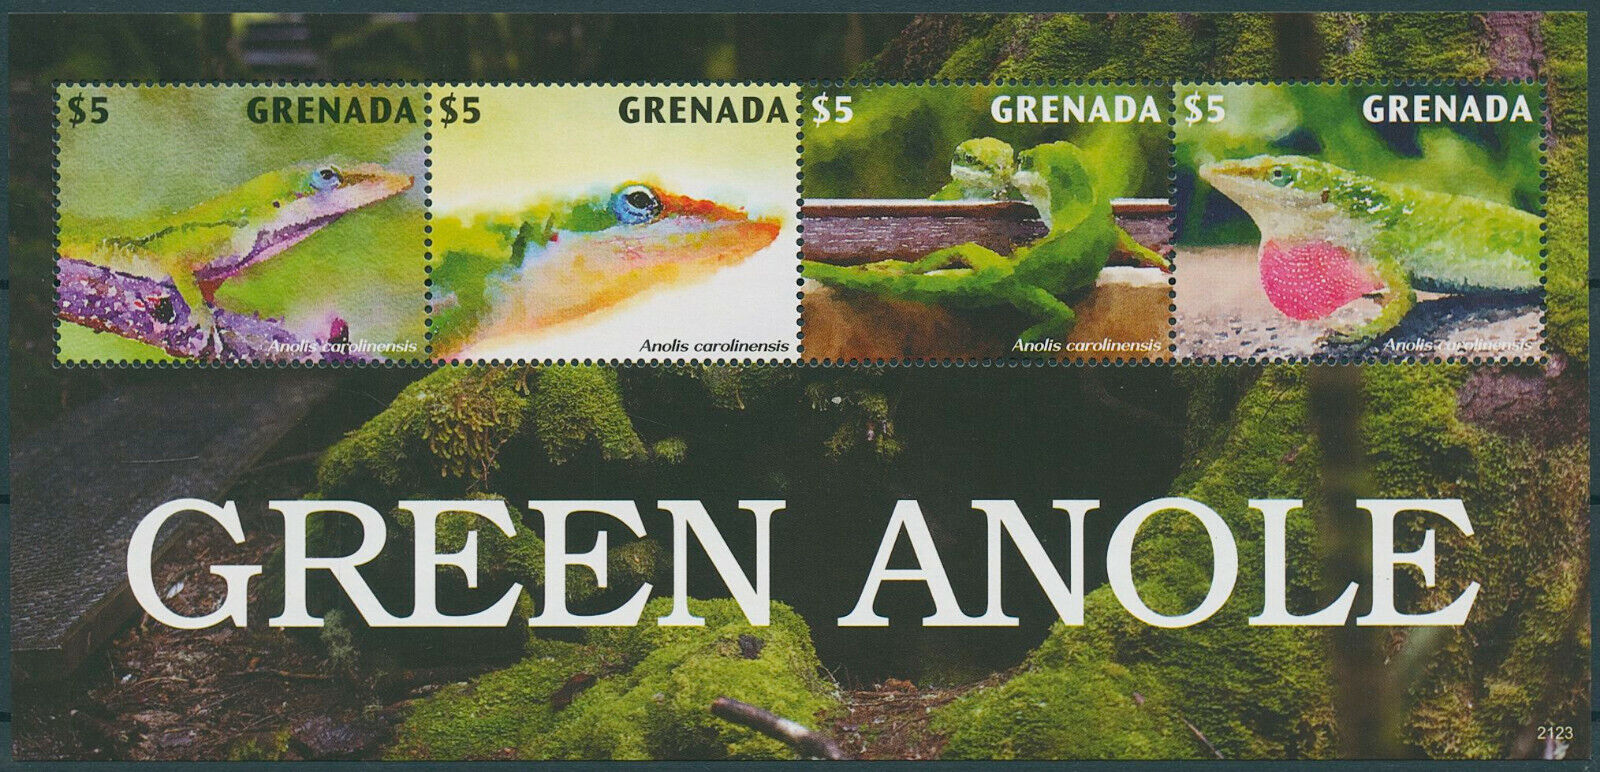 Grenada 2021 MNH Reptiles Stamps Green Anole Lizards Anoles 4v M/S